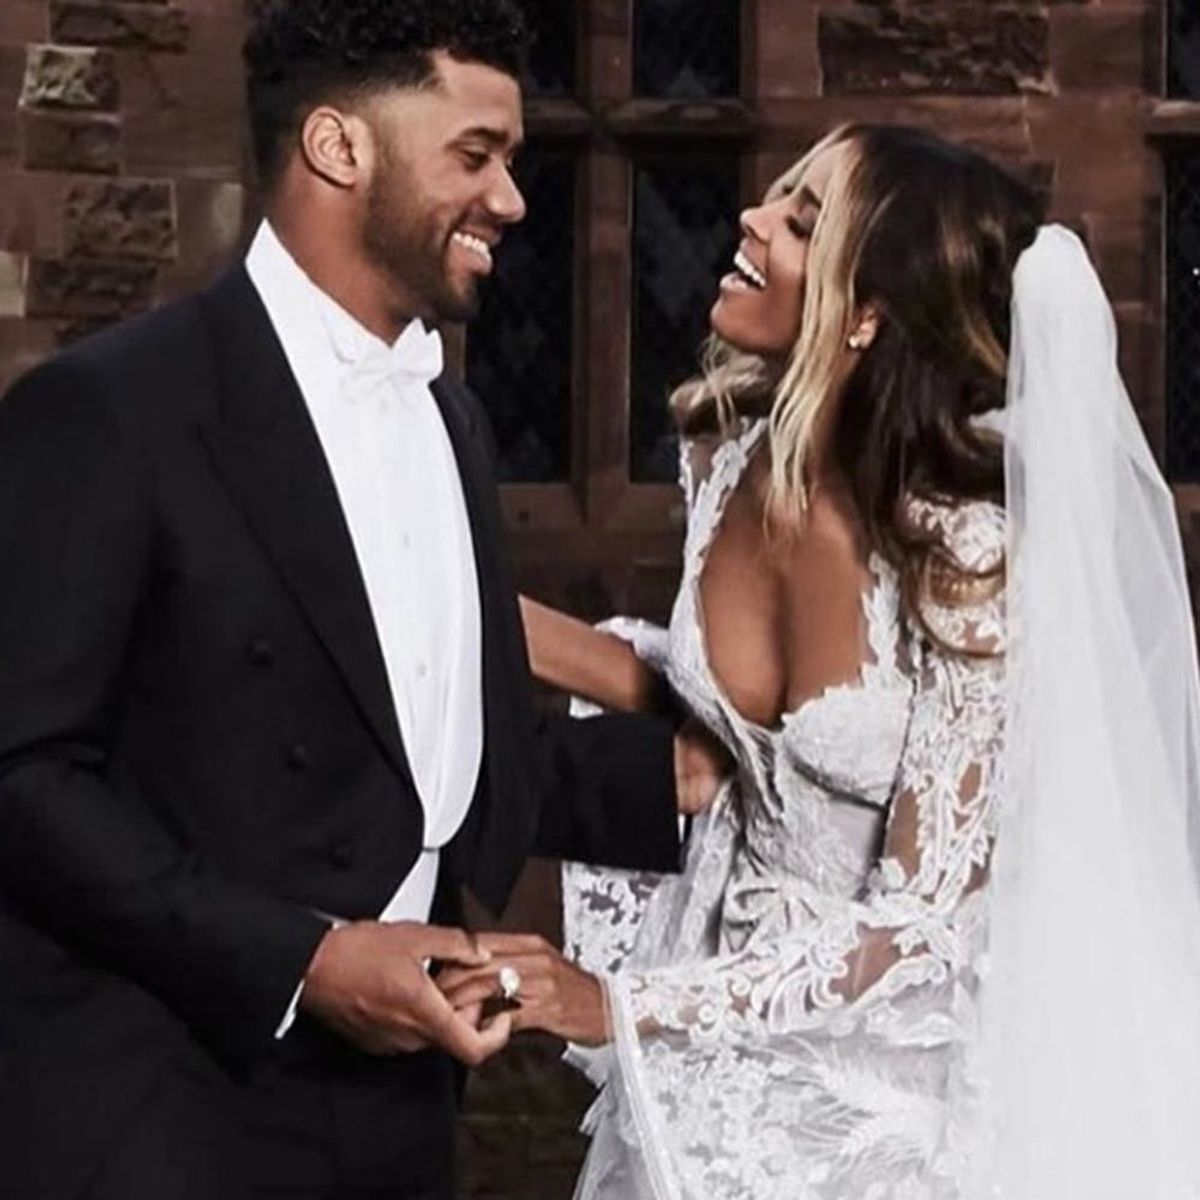 Check Out the Stunning Pics from This Summer’s Celeb Weddings